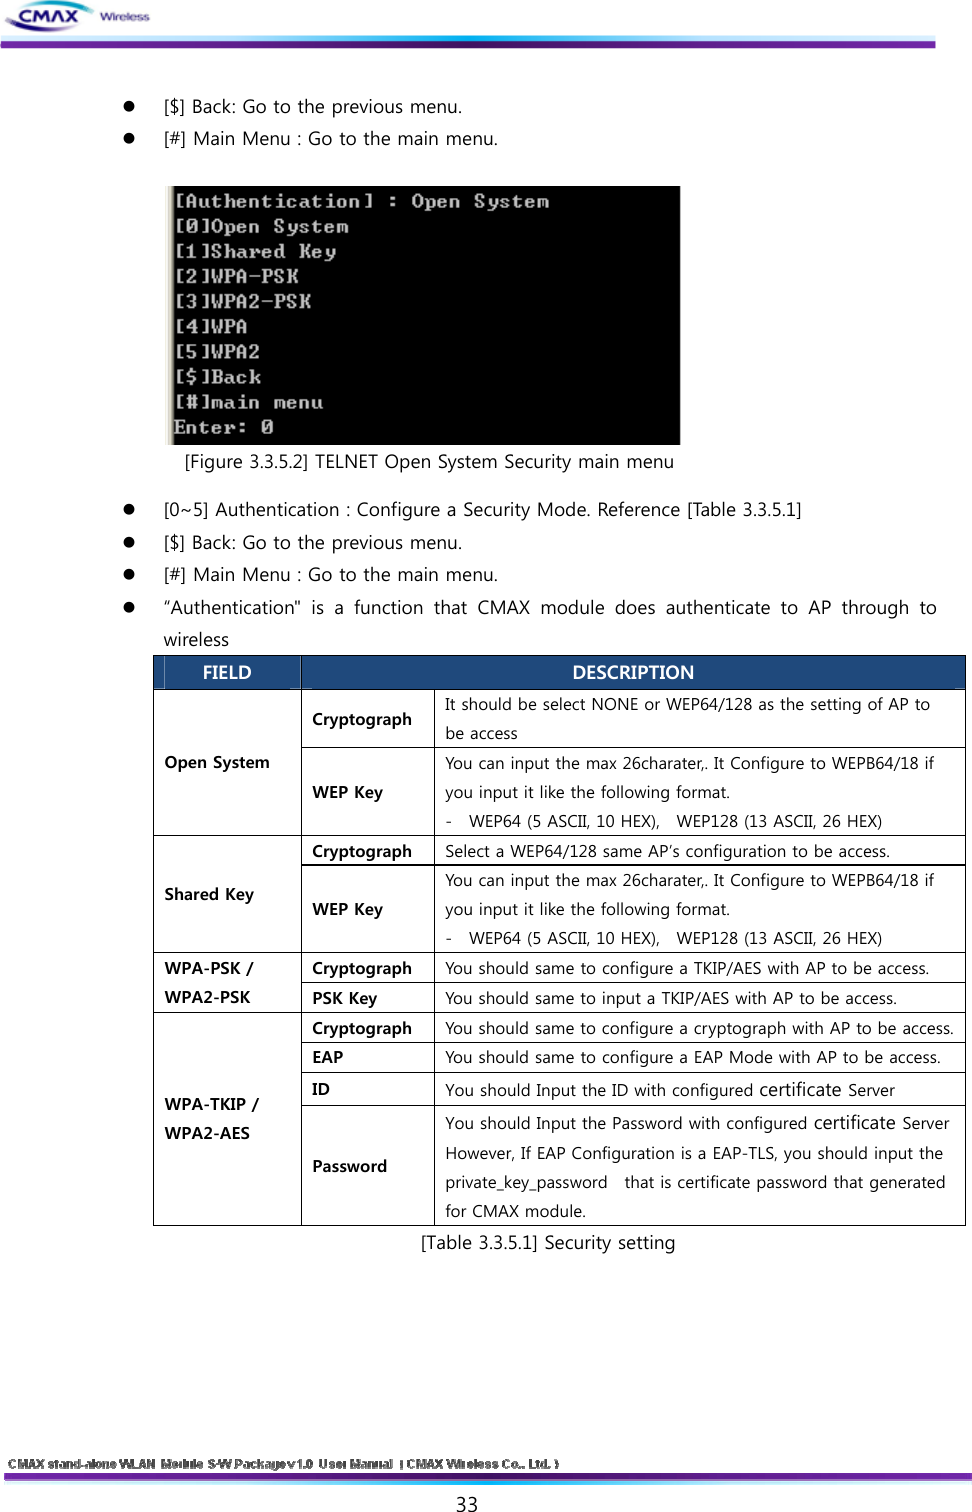   33   [$] Back: Go to the previous menu.    [#] Main Menu : Go to the main menu.   [Figure 3.3.5.2] TELNET Open System Security main menu  [0~5] Authentication : Configure a Security Mode. Reference [Table 3.3.5.1]  [$] Back: Go to the previous menu.    [#] Main Menu : Go to the main menu.  “Authentication&quot;  is  a  function  that  CMAX  module  does  authenticate to AP through to wireless FIELD  DESCRIPTION Cryptograph  It should be select NONE or WEP64/128 as the setting of AP to be access Open System WEP Key You can input the max 26charater,. It Configure to WEPB64/18 if you input it like the following format. -    WEP64 (5 ASCII, 10 HEX),    WEP128 (13 ASCII, 26 HEX) Cryptograph  Select a WEP64/128 same AP’s configuration to be access. Shared Key  WEP Key You can input the max 26charater,. It Configure to WEPB64/18 if you input it like the following format. -    WEP64 (5 ASCII, 10 HEX),    WEP128 (13 ASCII, 26 HEX) Cryptograph  You should same to configure a TKIP/AES with AP to be access. WPA-PSK / WPA2-PSK  PSK Key  You should same to input a TKIP/AES with AP to be access. Cryptograph  You should same to configure a cryptograph with AP to be access.EAP  You should same to configure a EAP Mode with AP to be access. ID  You should Input the ID with configured certificate Server WPA-TKIP / WPA2-AES Password You should Input the Password with configured certificate ServerHowever, If EAP Configuration is a EAP-TLS, you should input the private_key_password    that is certificate password that generated for CMAX module. [Table 3.3.5.1] Security setting   